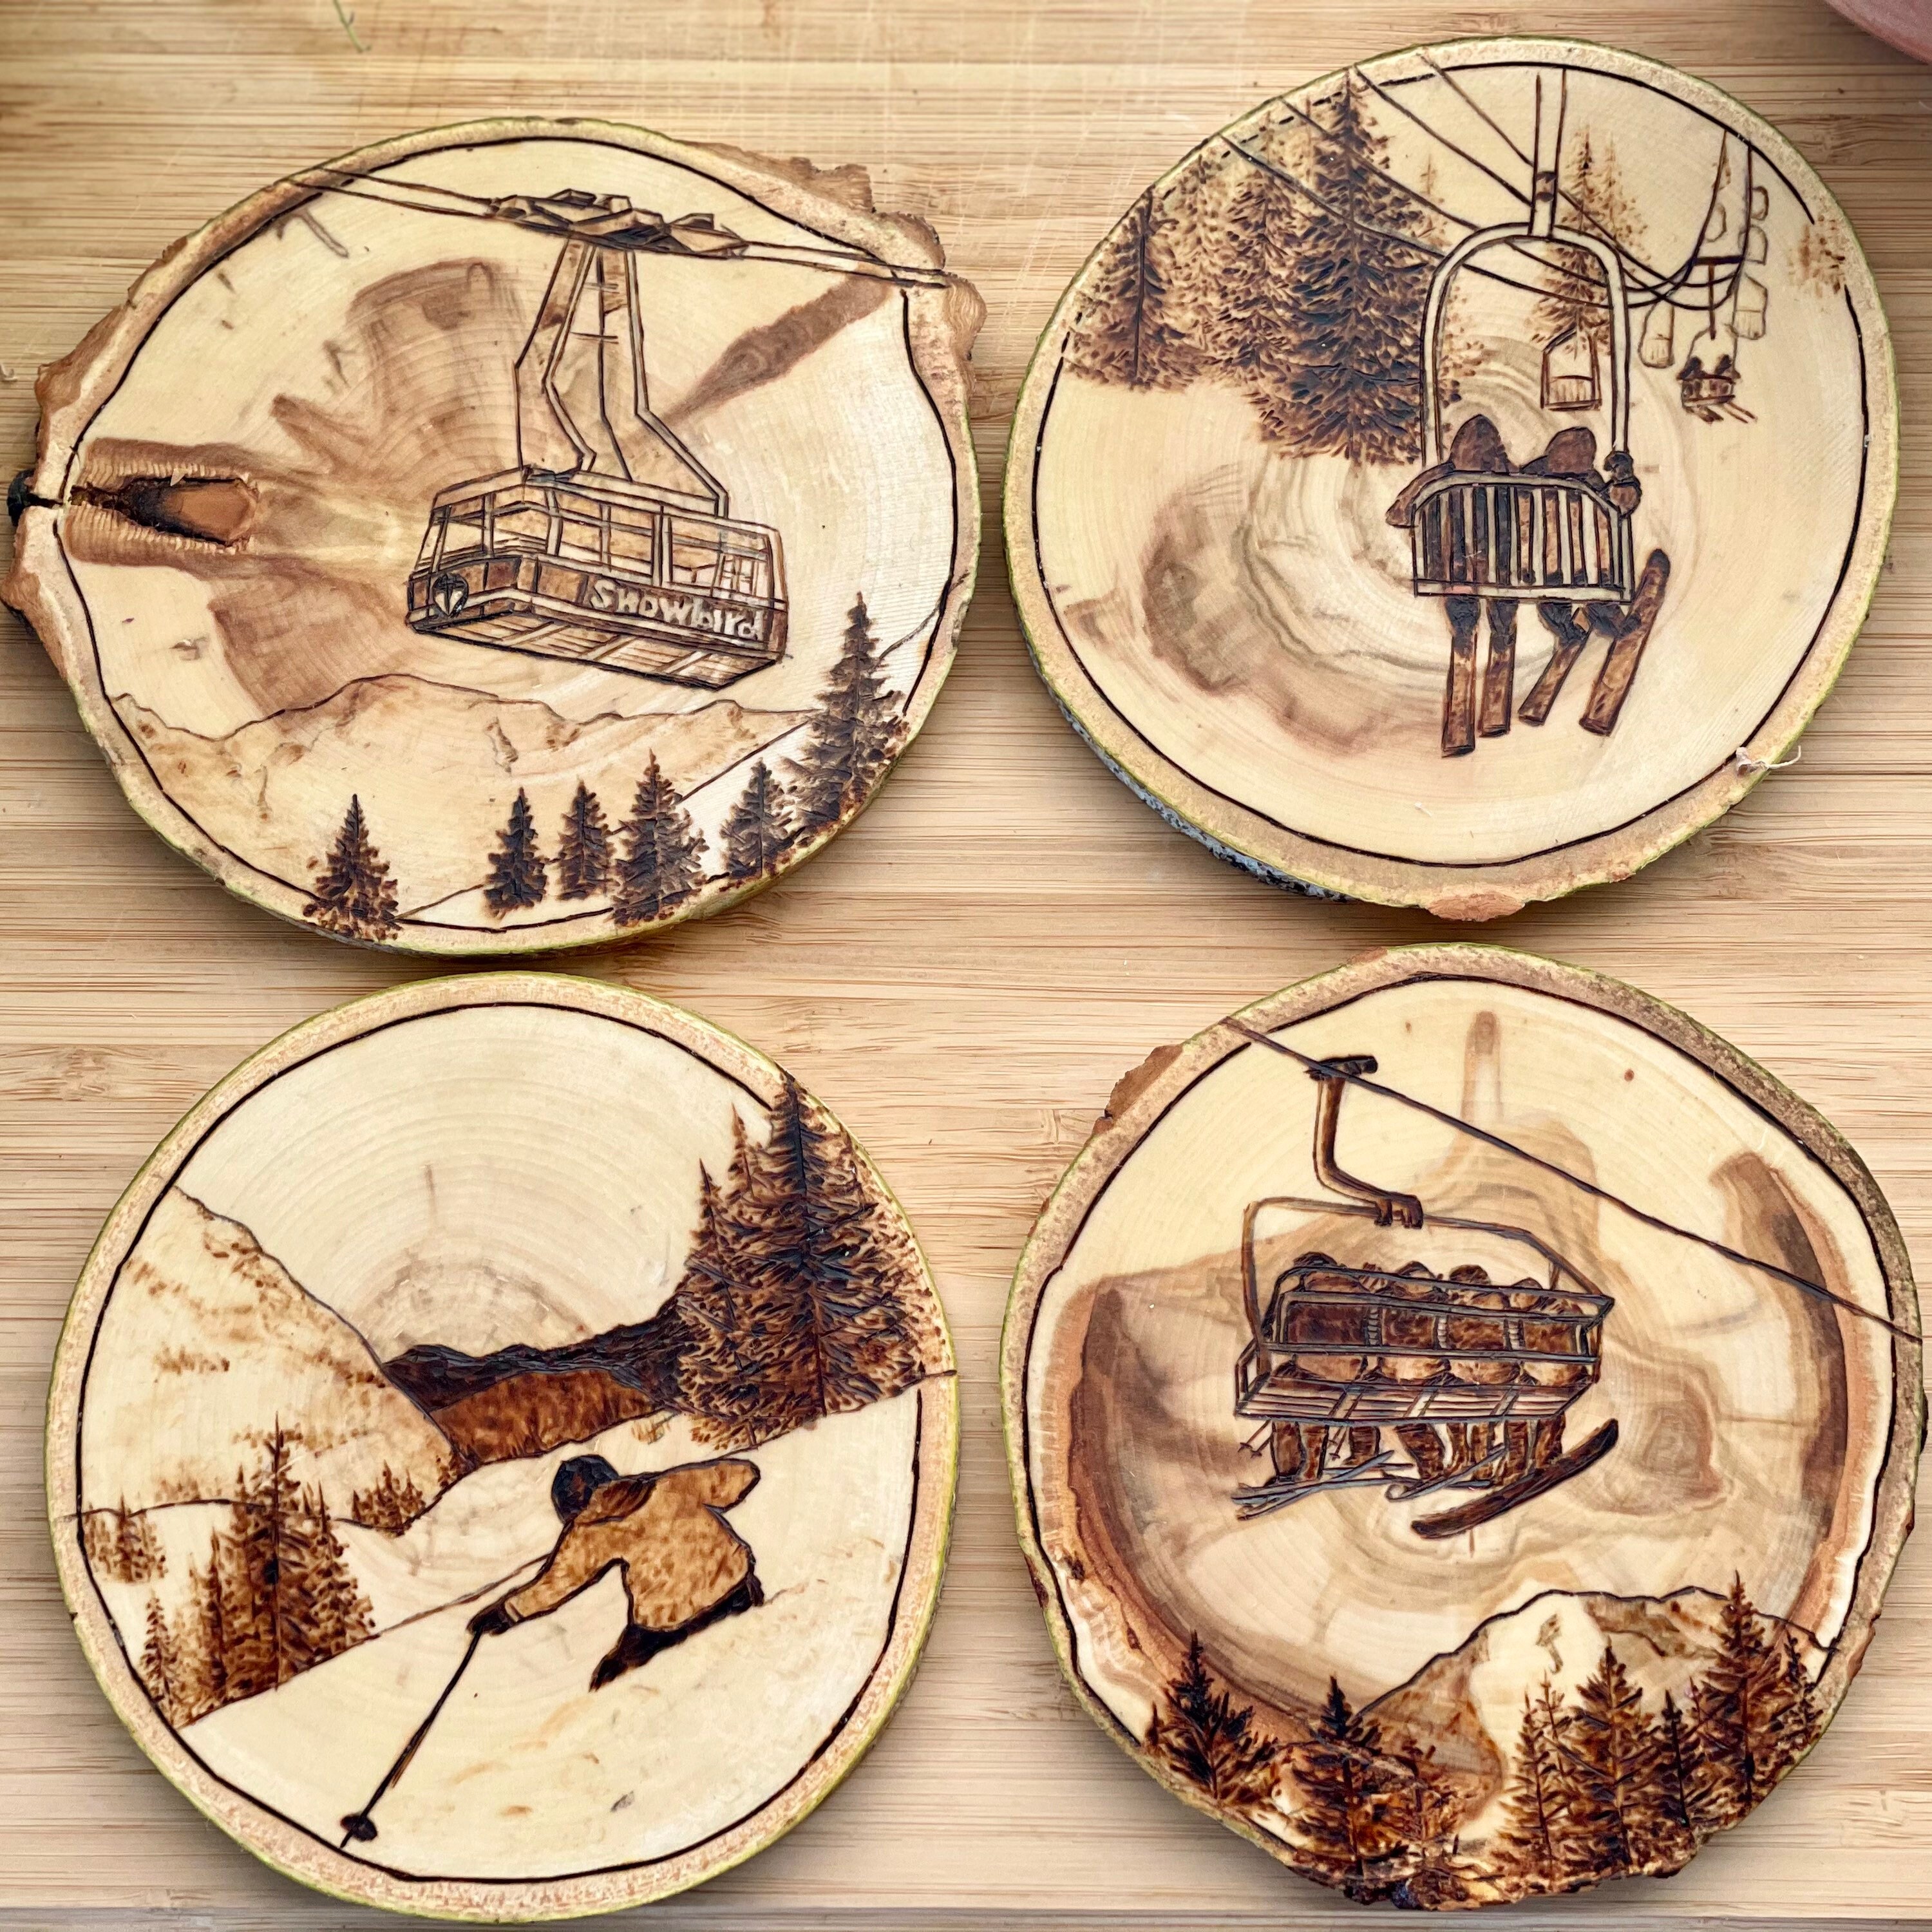 Pyrography wood burning Coaster Cutting Cheese Board Centerpiece Gift Dragon